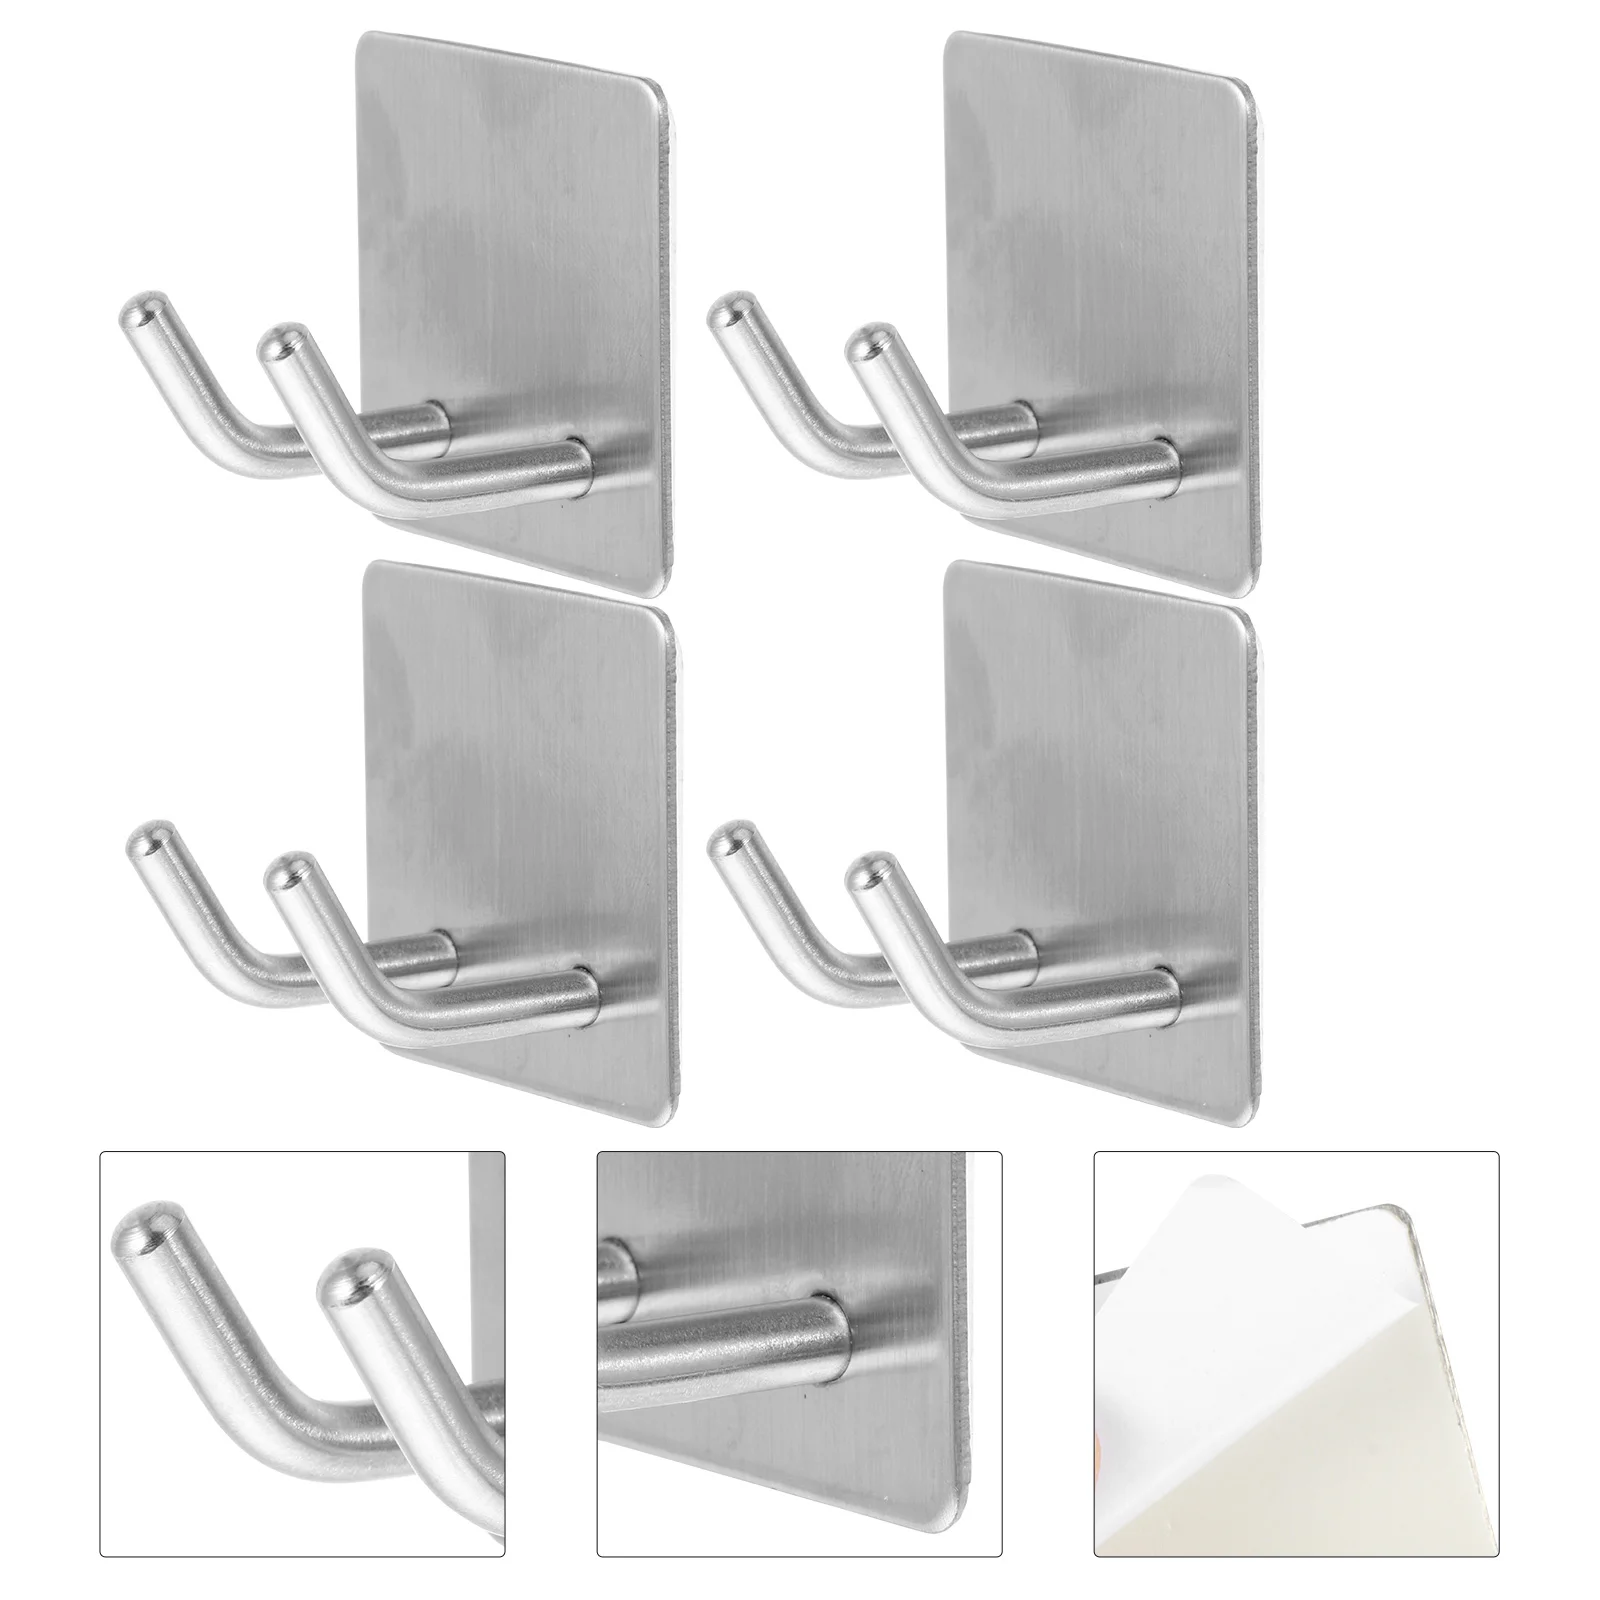 

4pcs Practical Hook For Hanging Home Improvement Utility Hook Sticky Hook Adhesive Hook Heavy Duty Multipurpose Traceless Hook